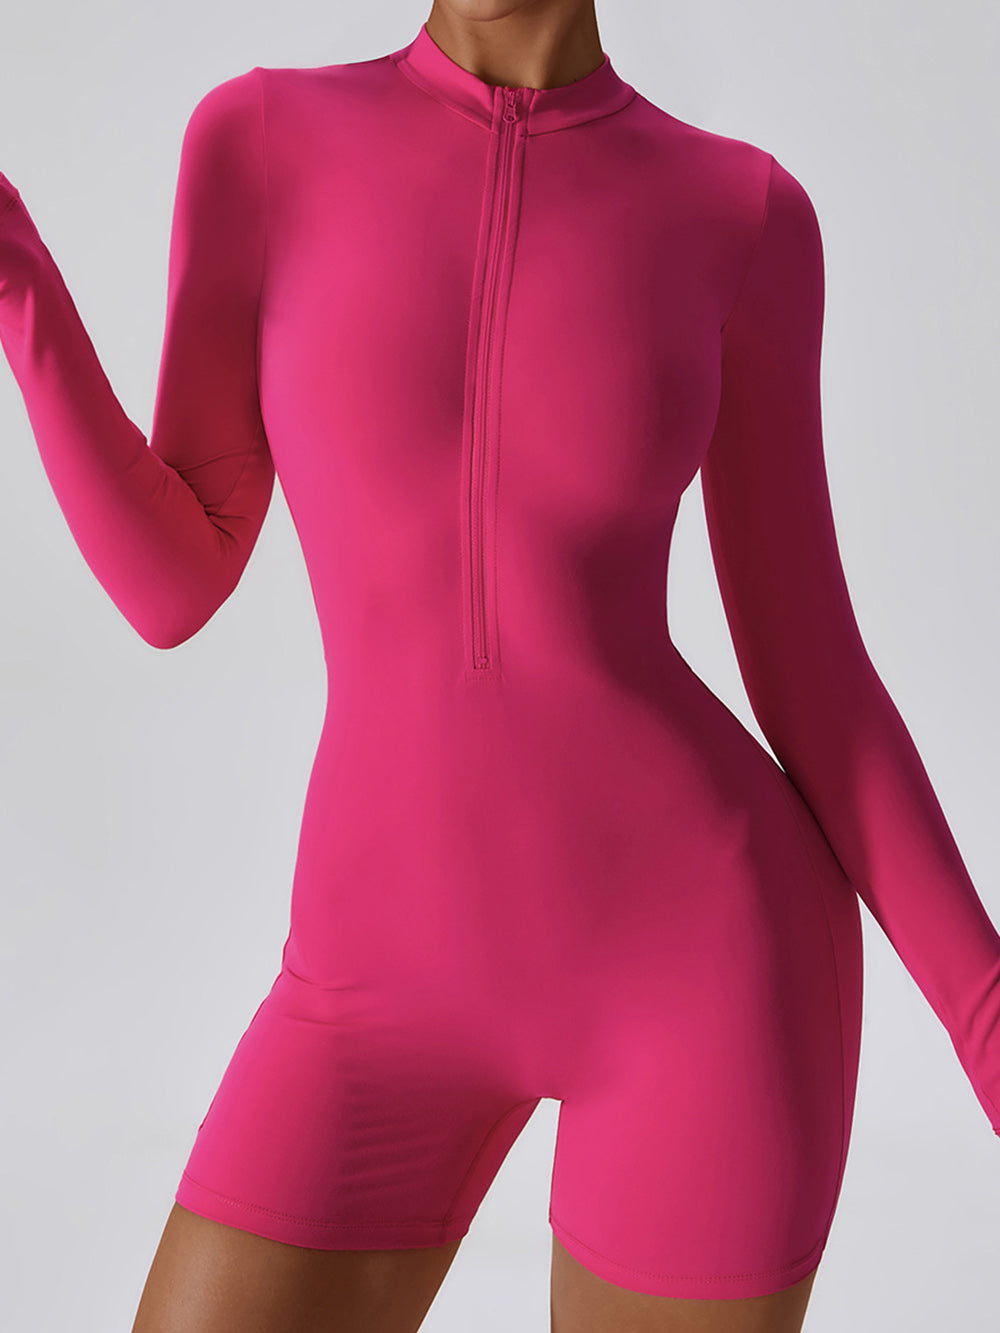 Affordfit Limitless Luxe Zip Front Rompers - Hot Pink